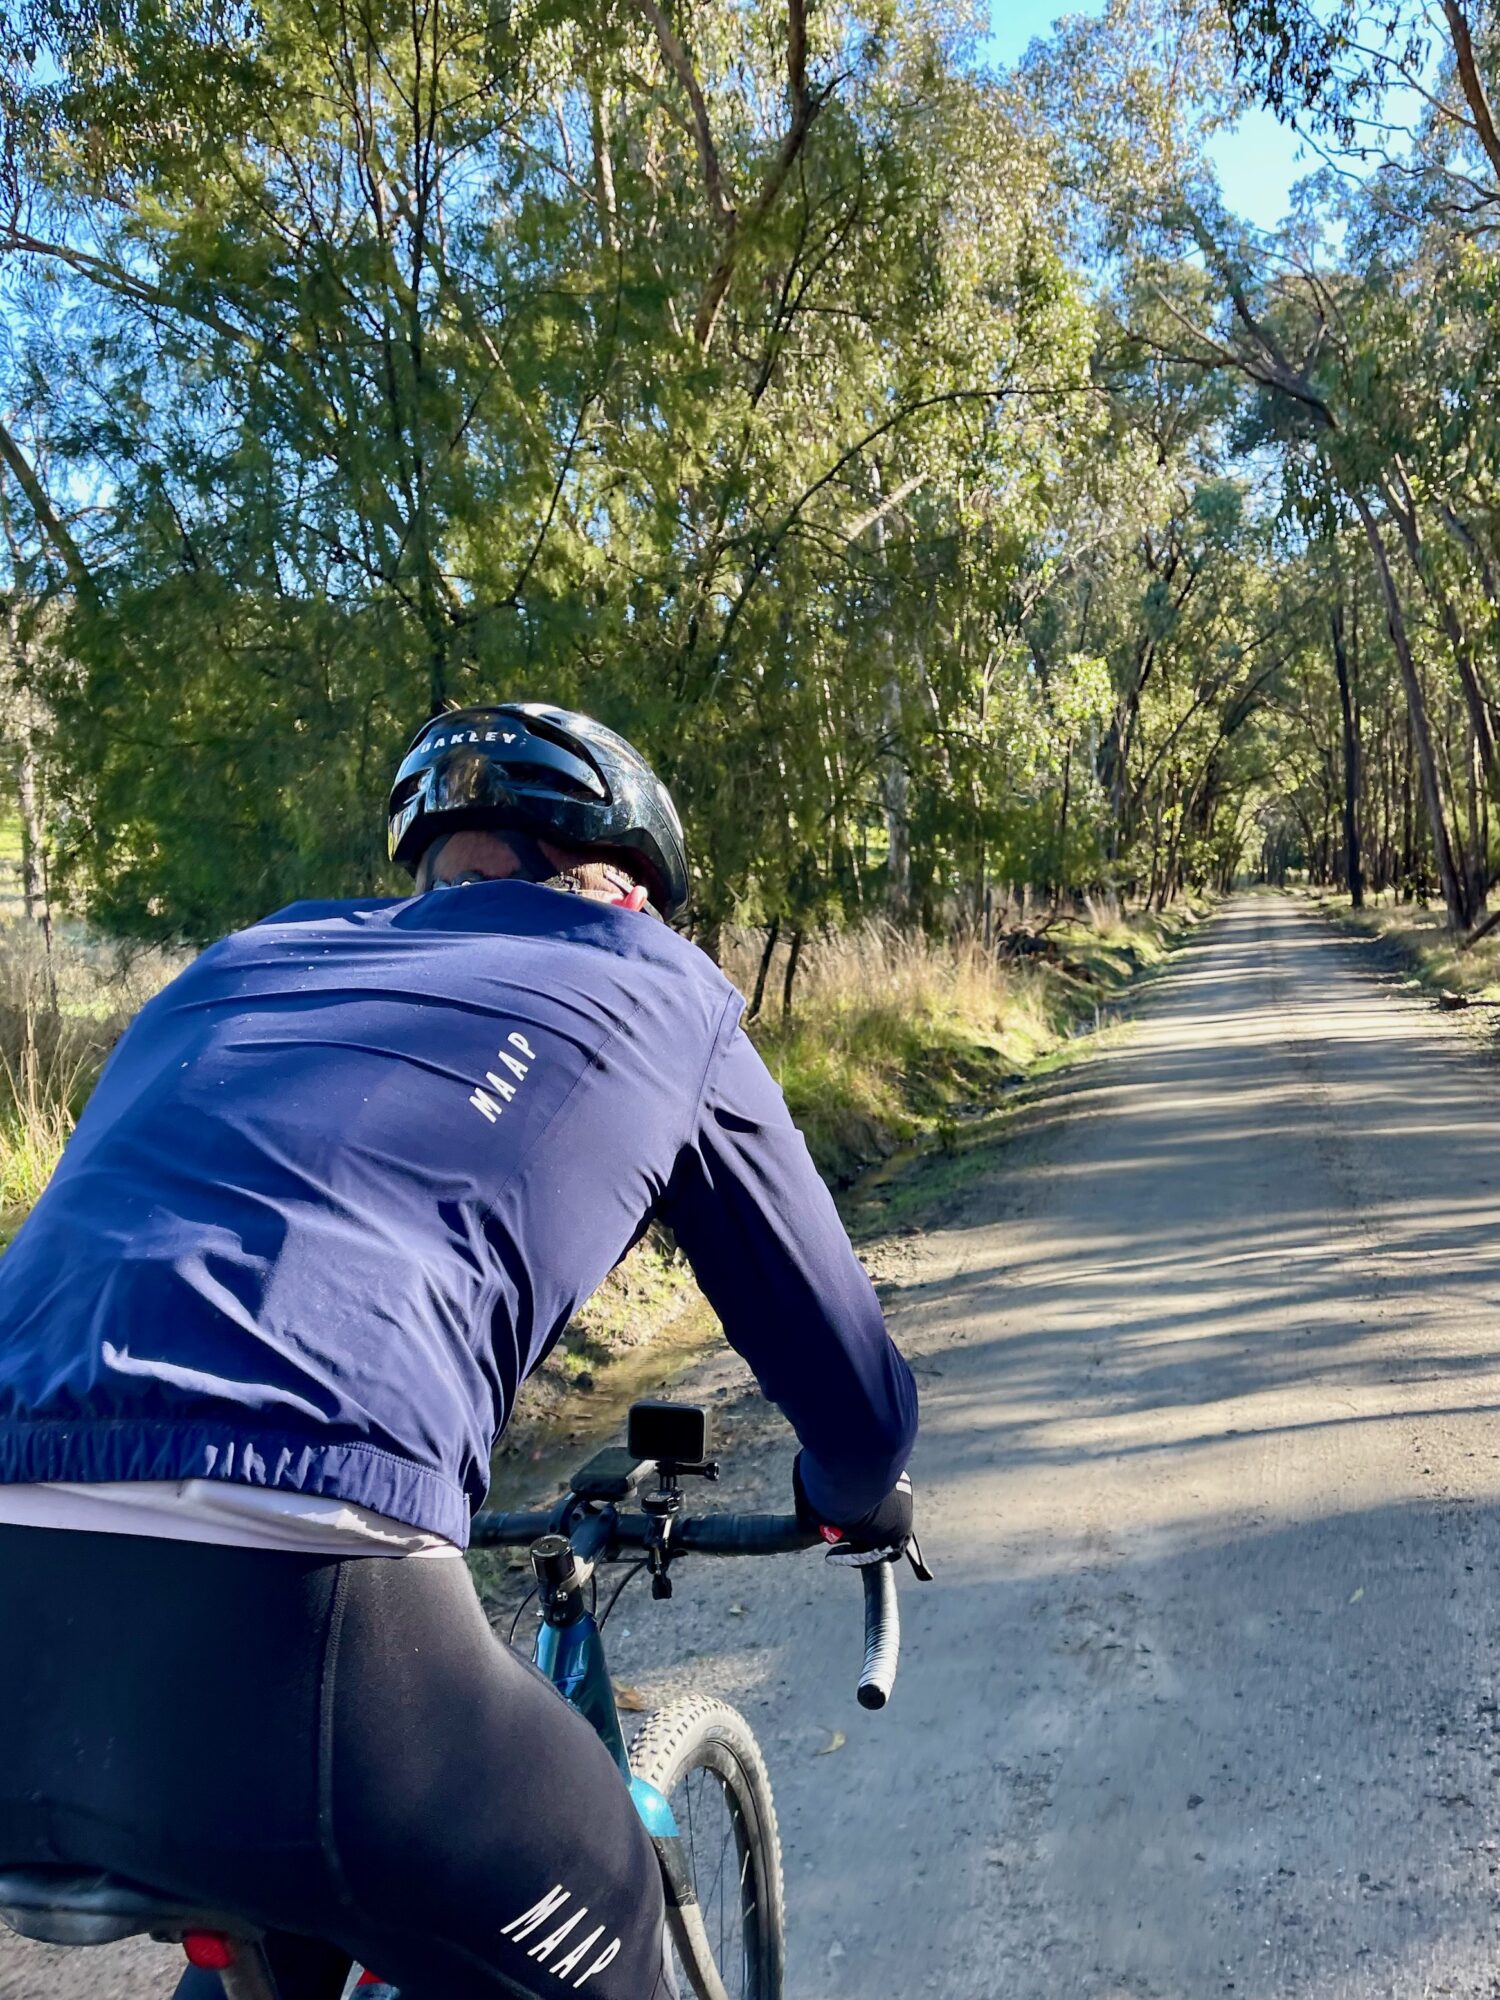 A cyclist gravel riding on a smooth gravel road through native forest